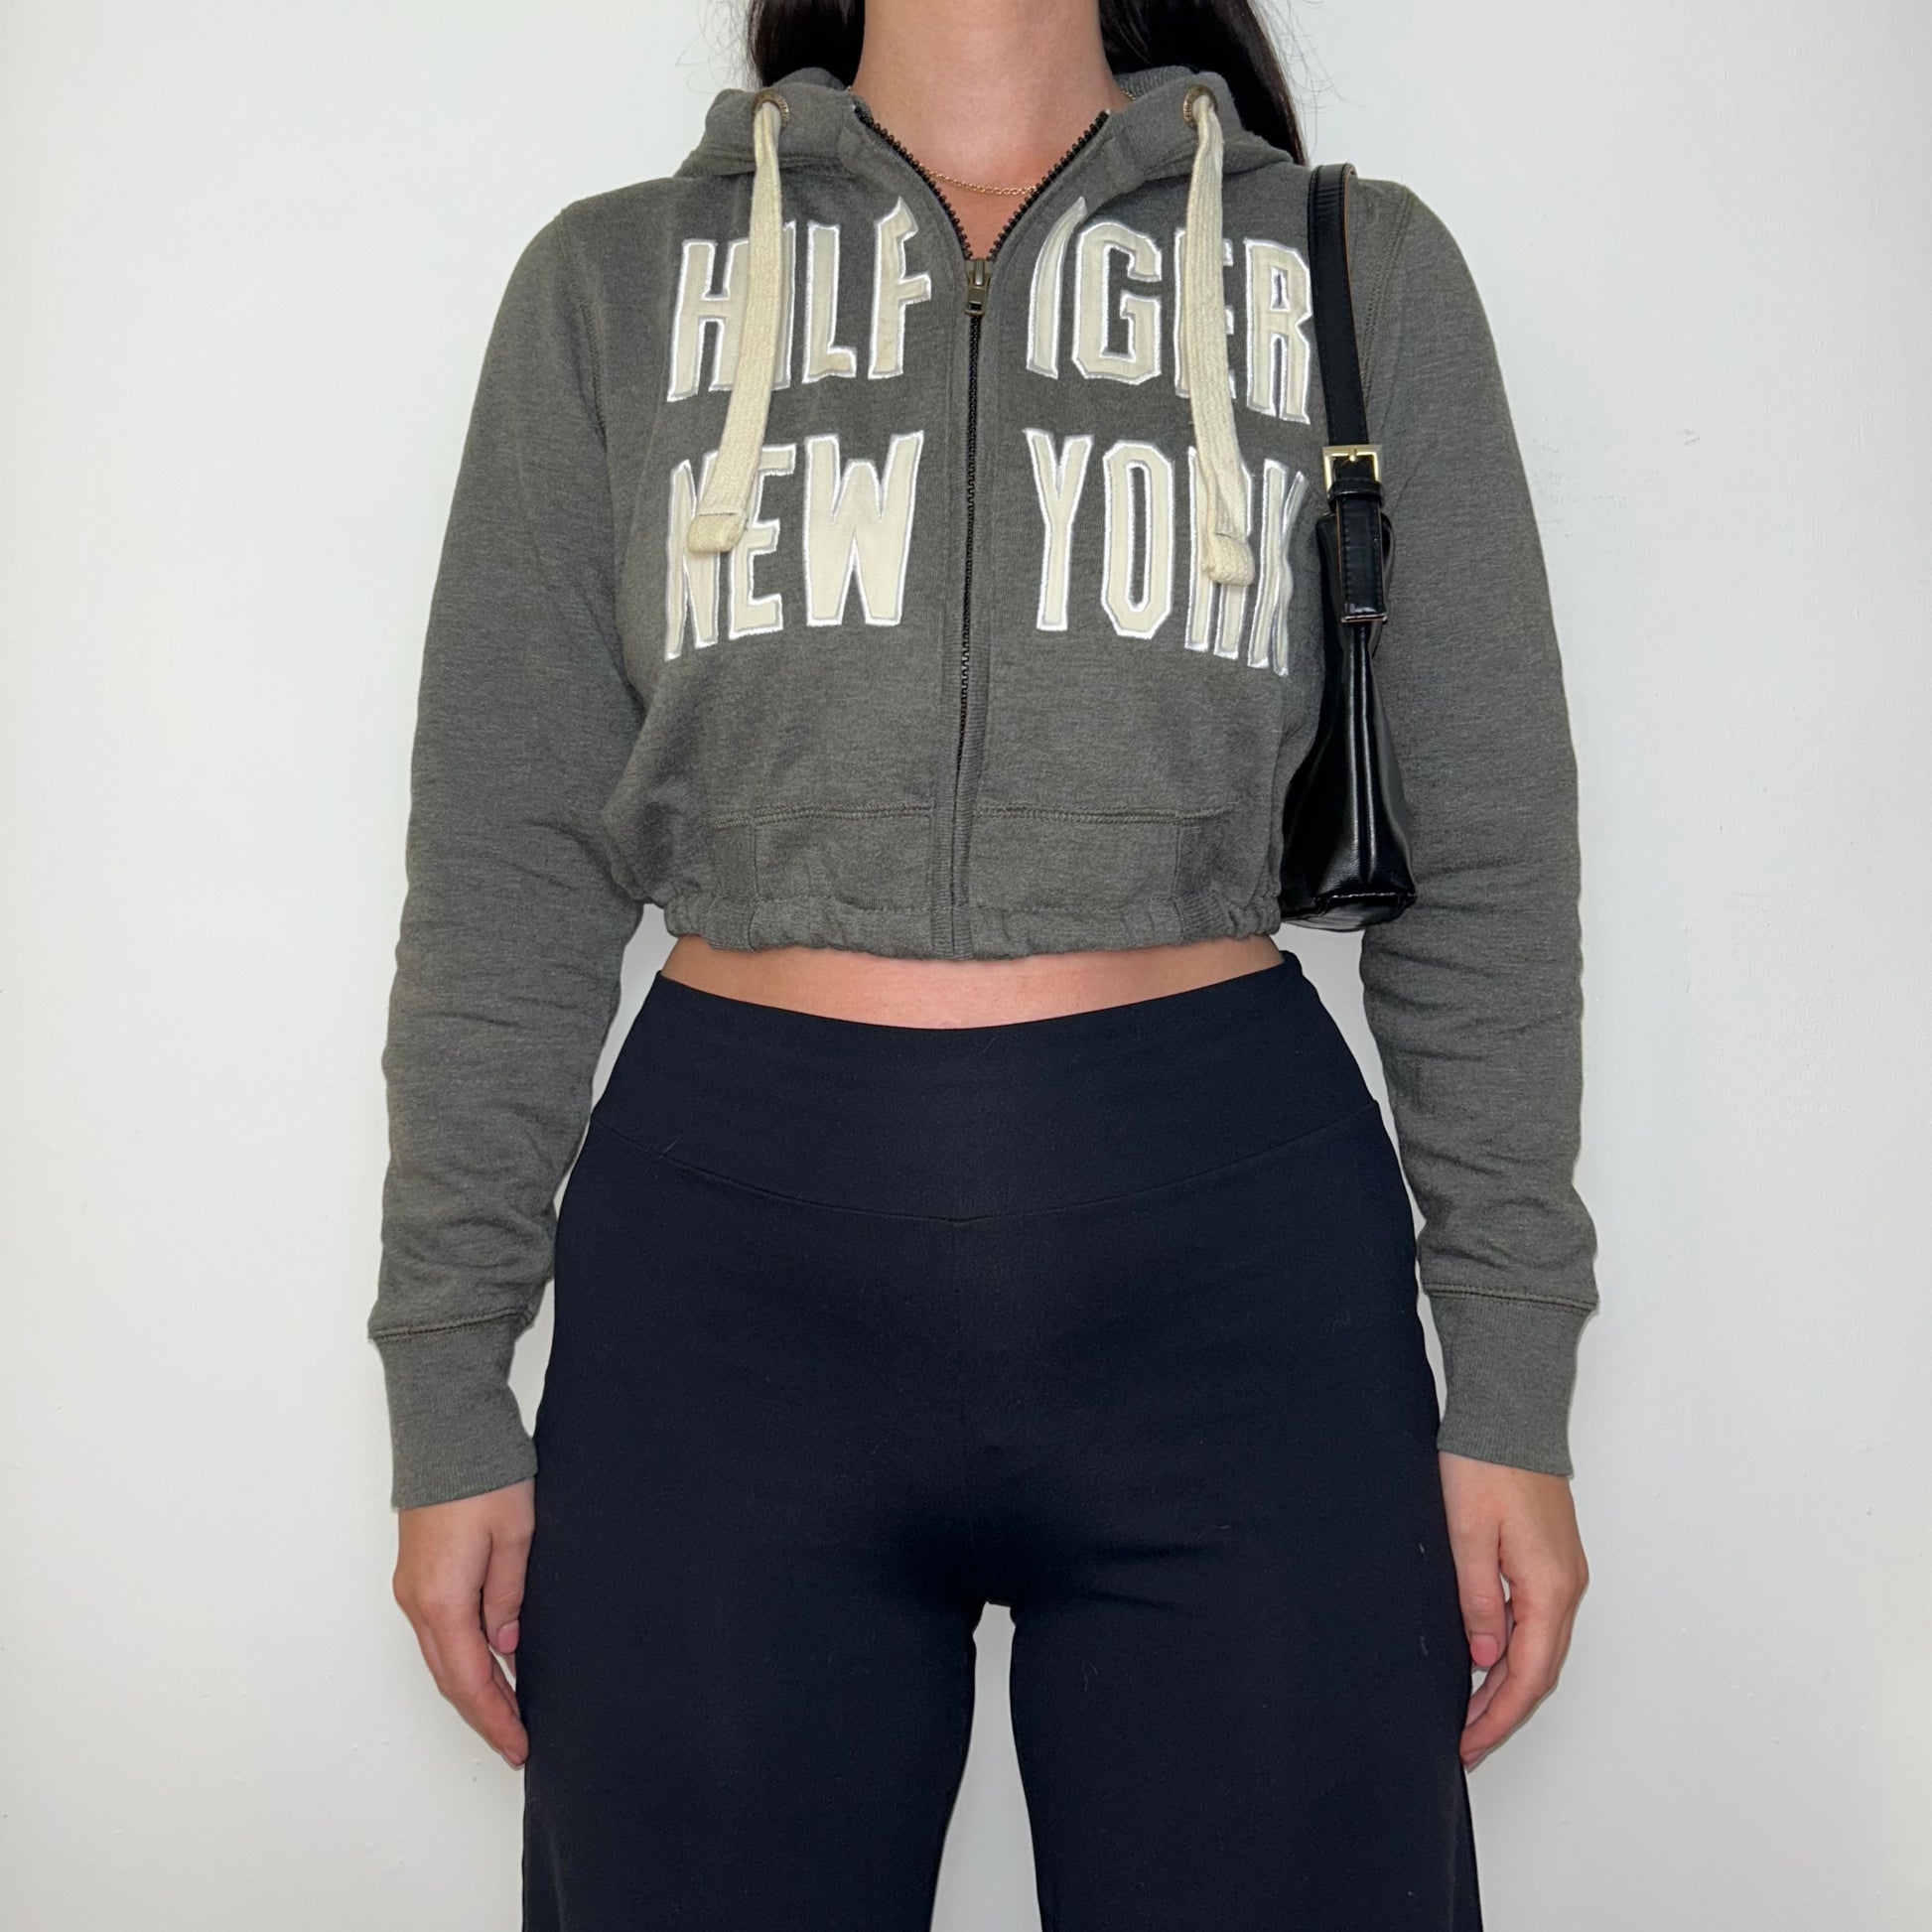 grey tommy hilfiger cropped hoodie shown on a model wearing black trousers and a black shoulder bag